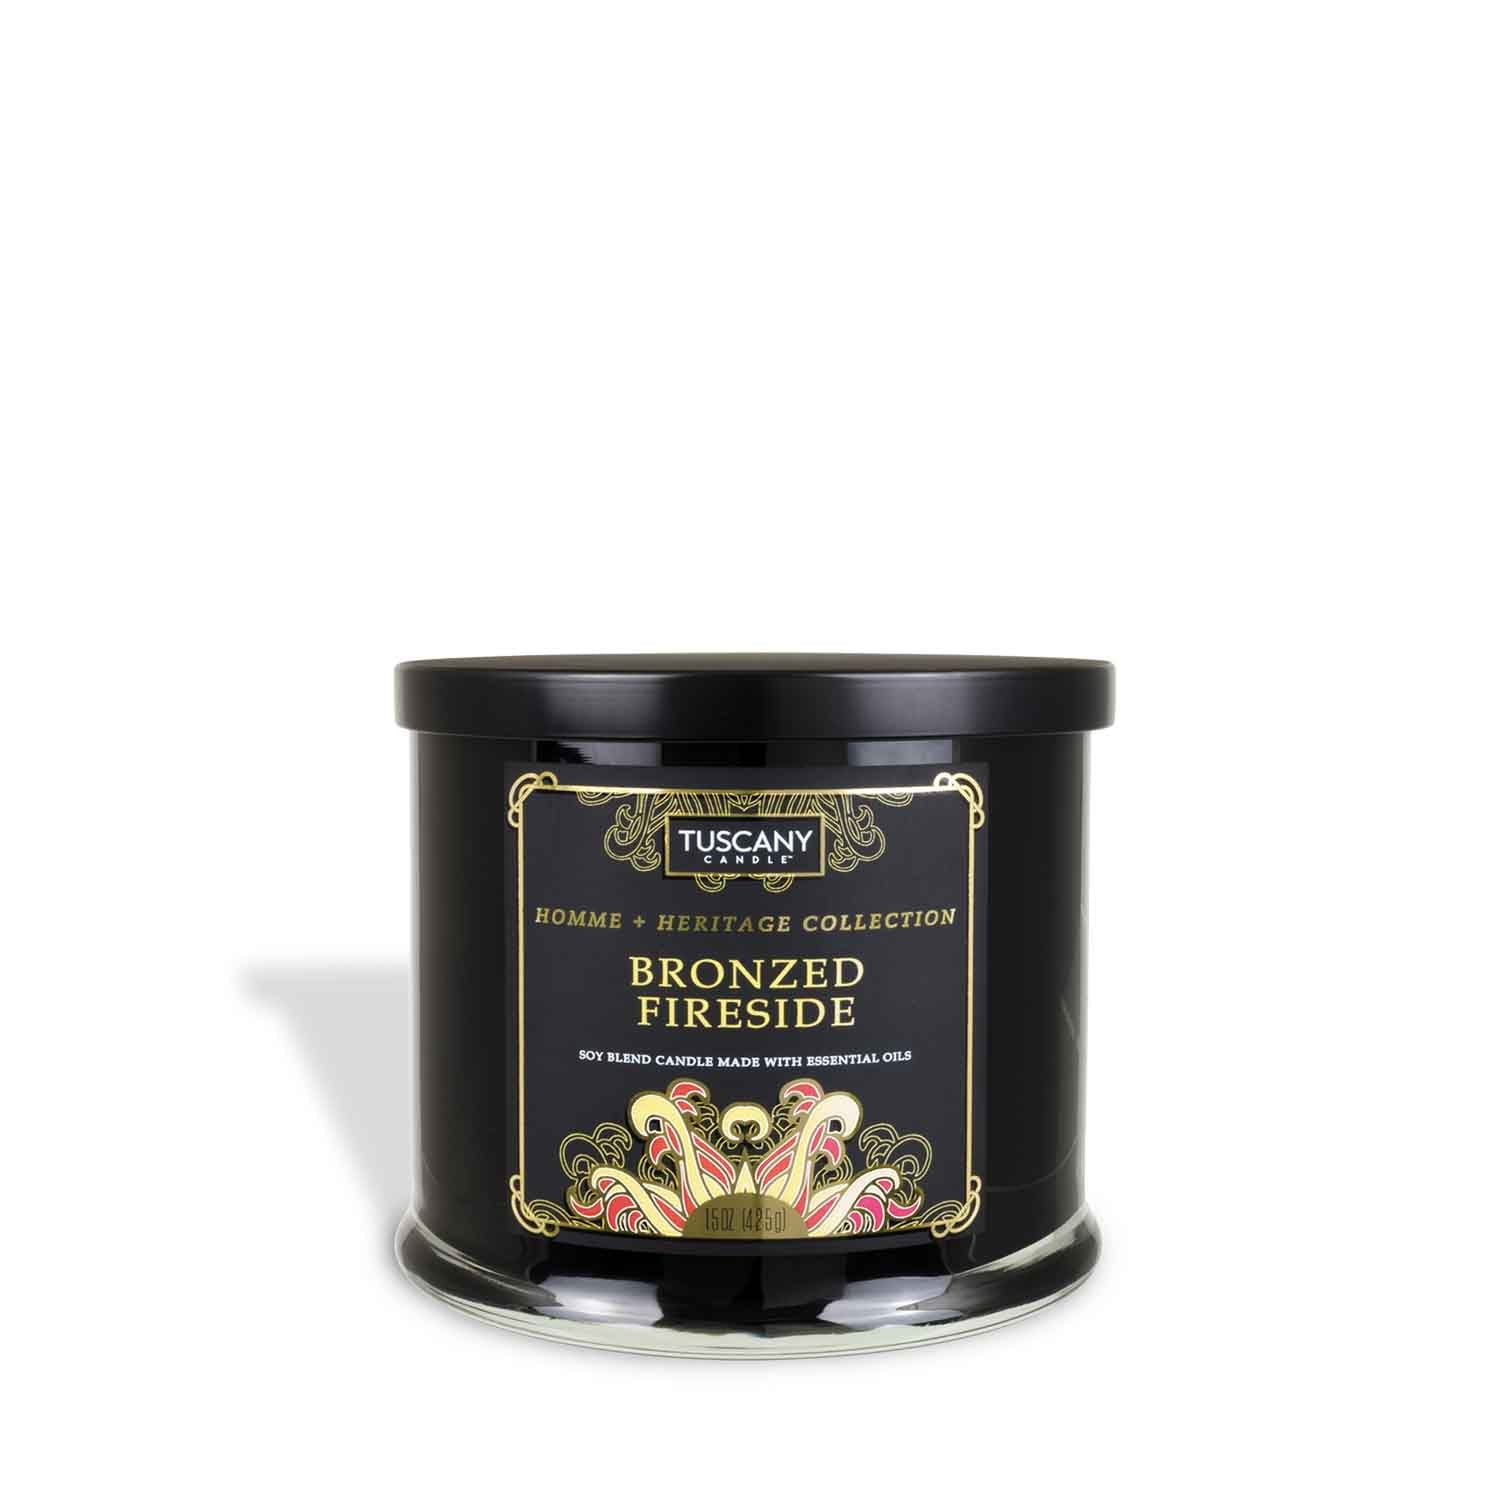 A "Bronzed Fireside Scented Jar Candle (15 oz) – Homme + Heritage Collection" by Tuscany Candle.